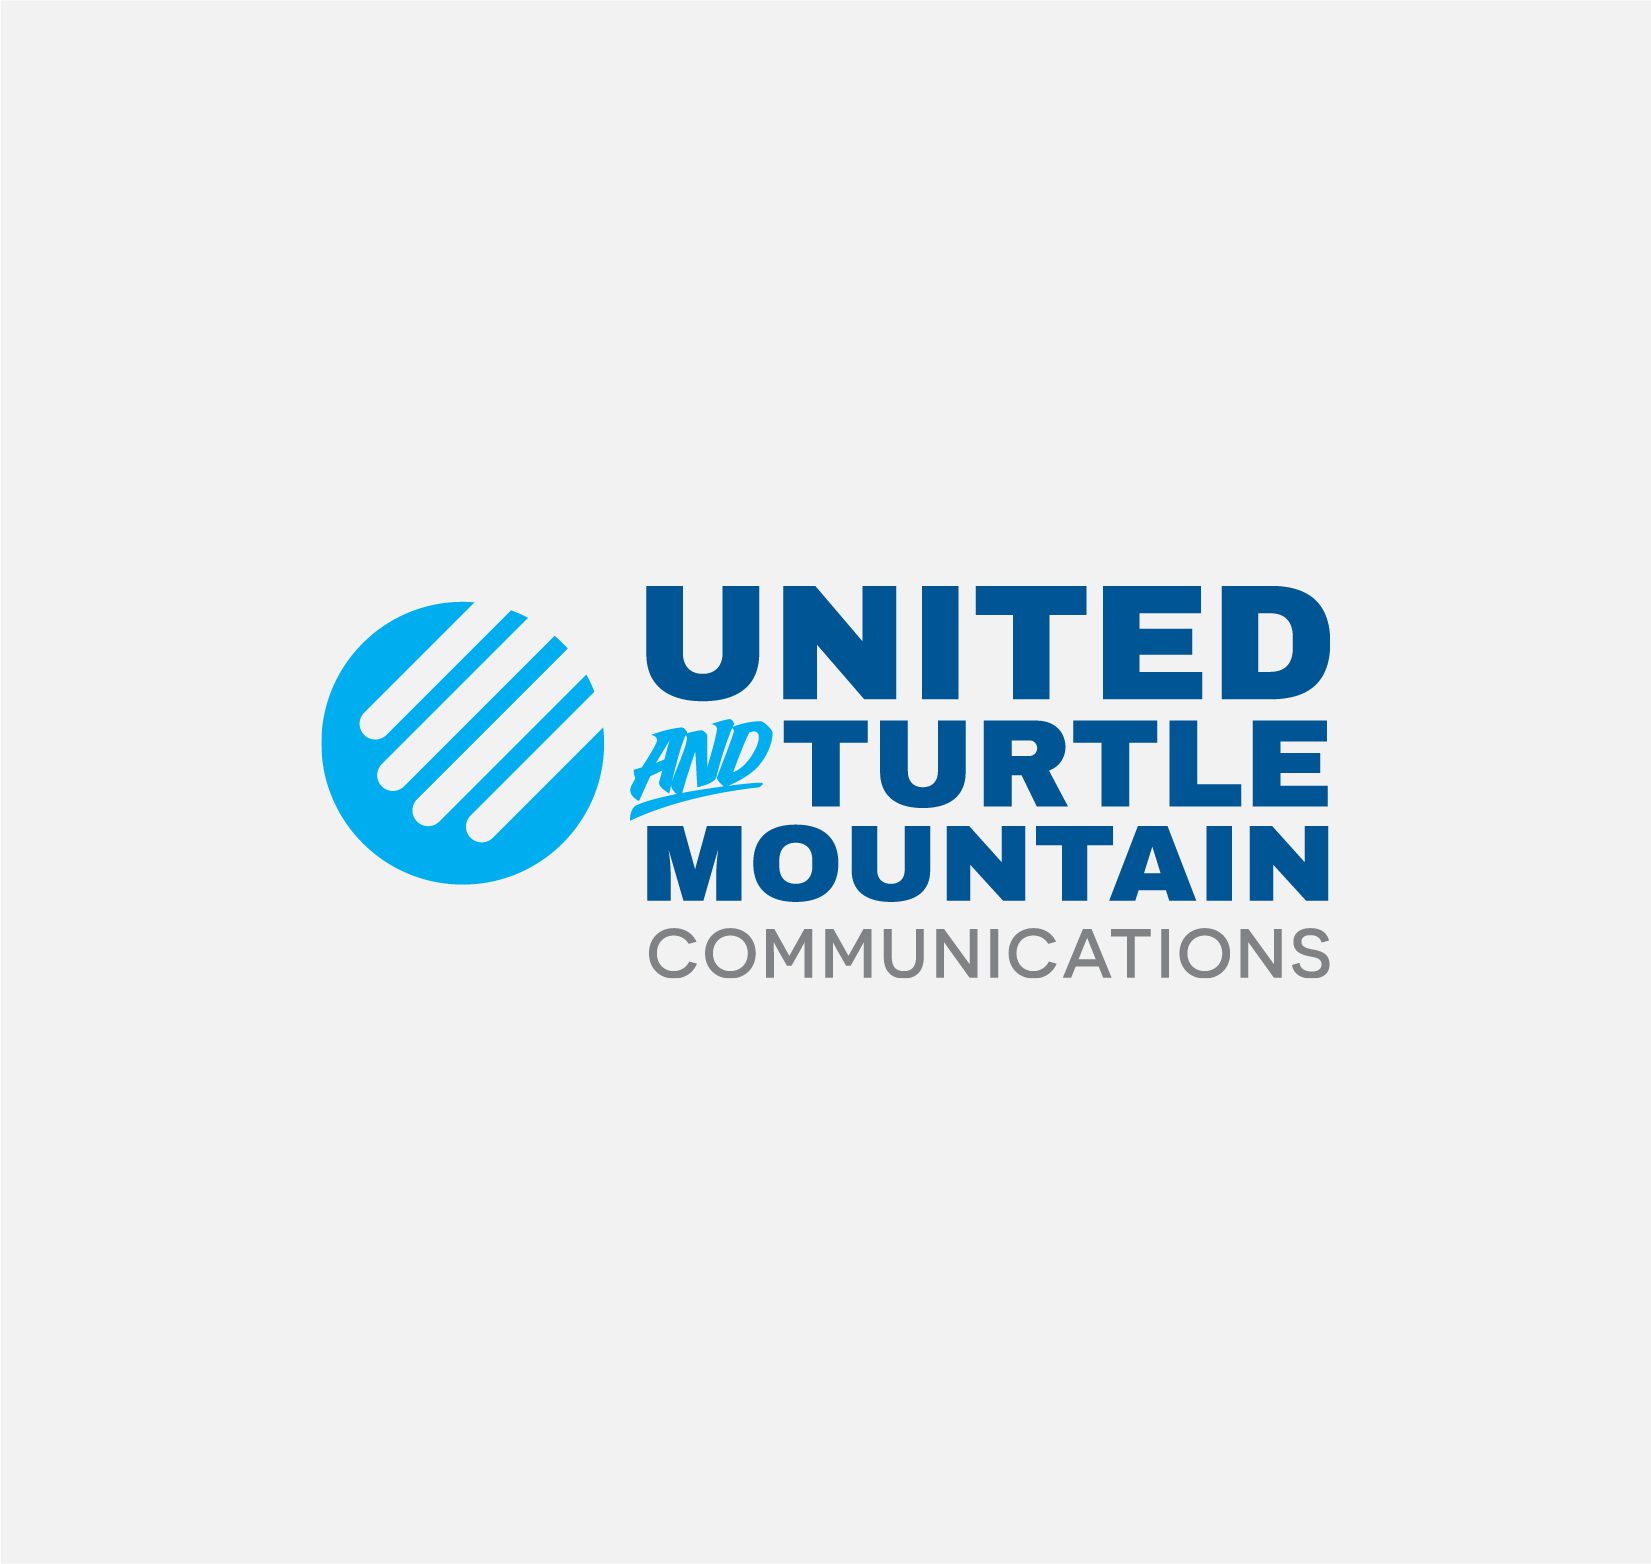 United and Turtle Mountain Communications logo